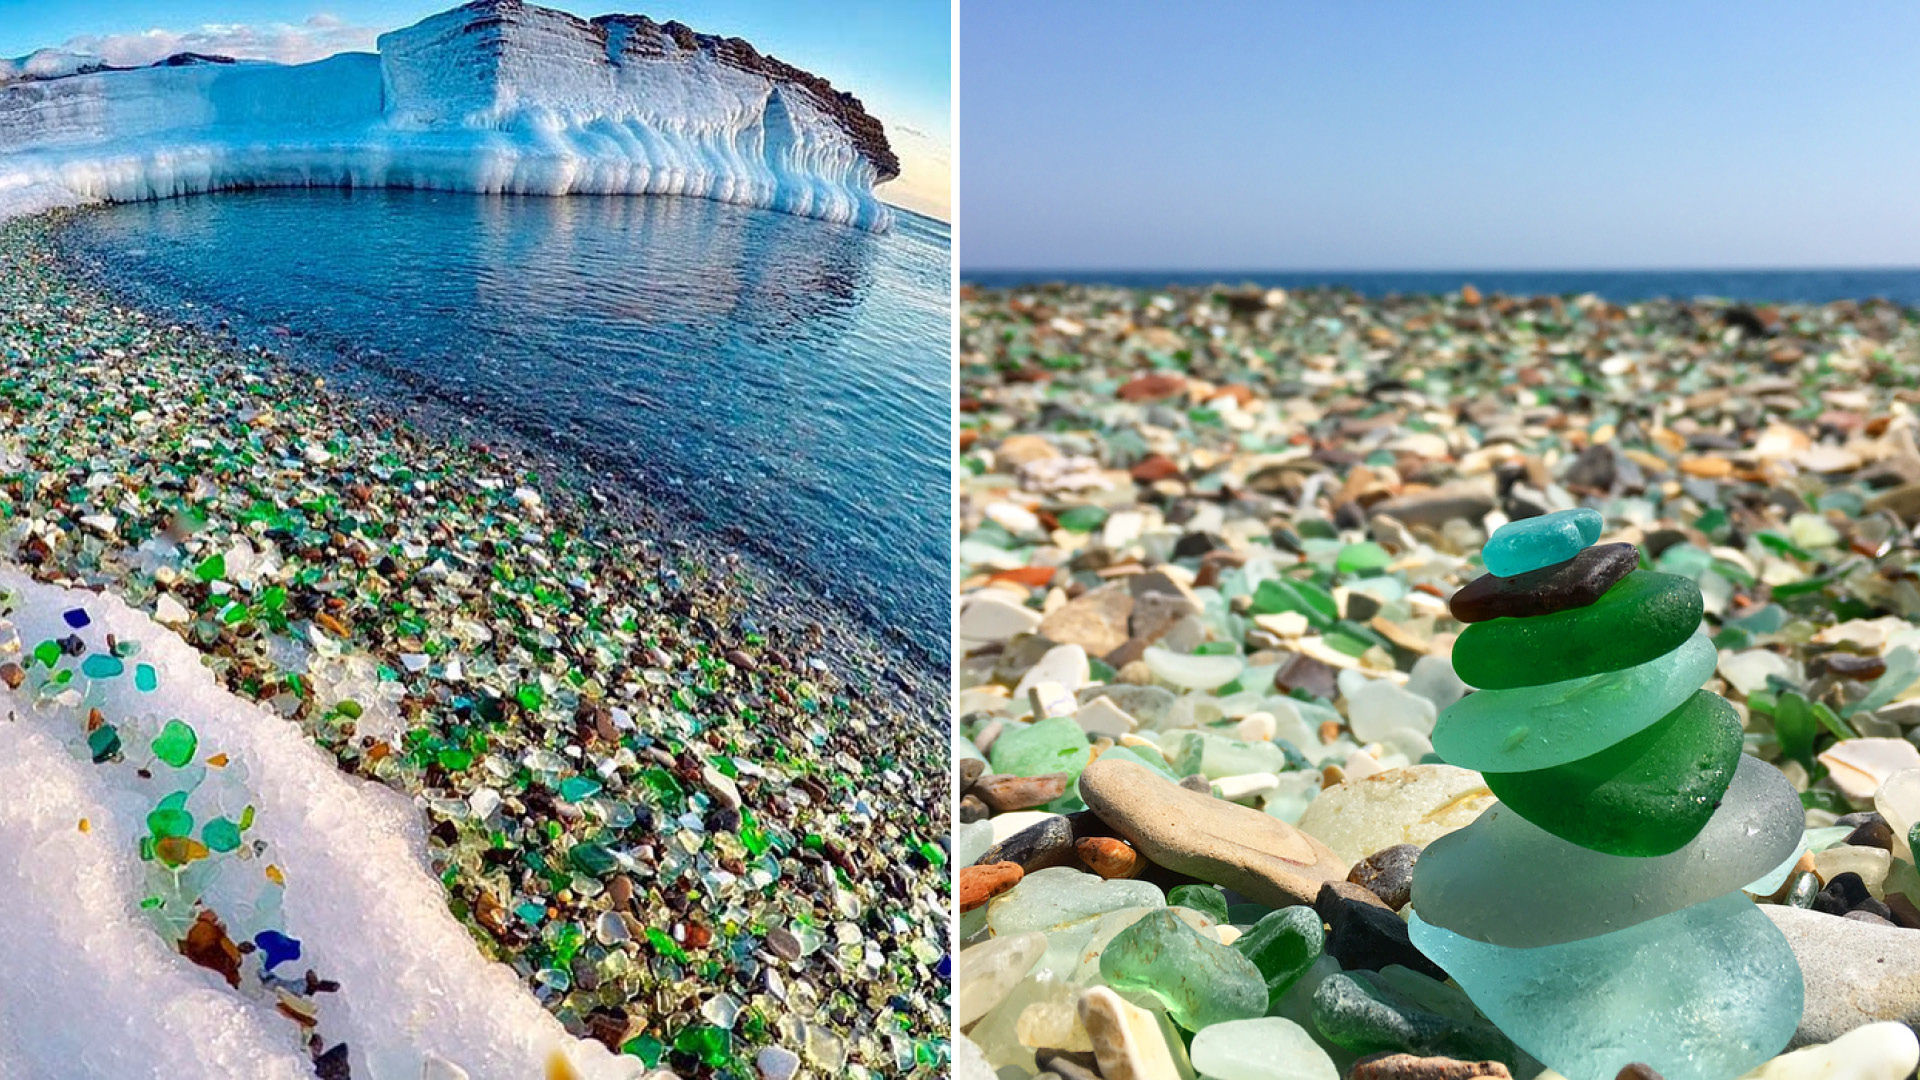 This Week Discover The Glass Pebble Beaches Of Ussuri Bay Russia